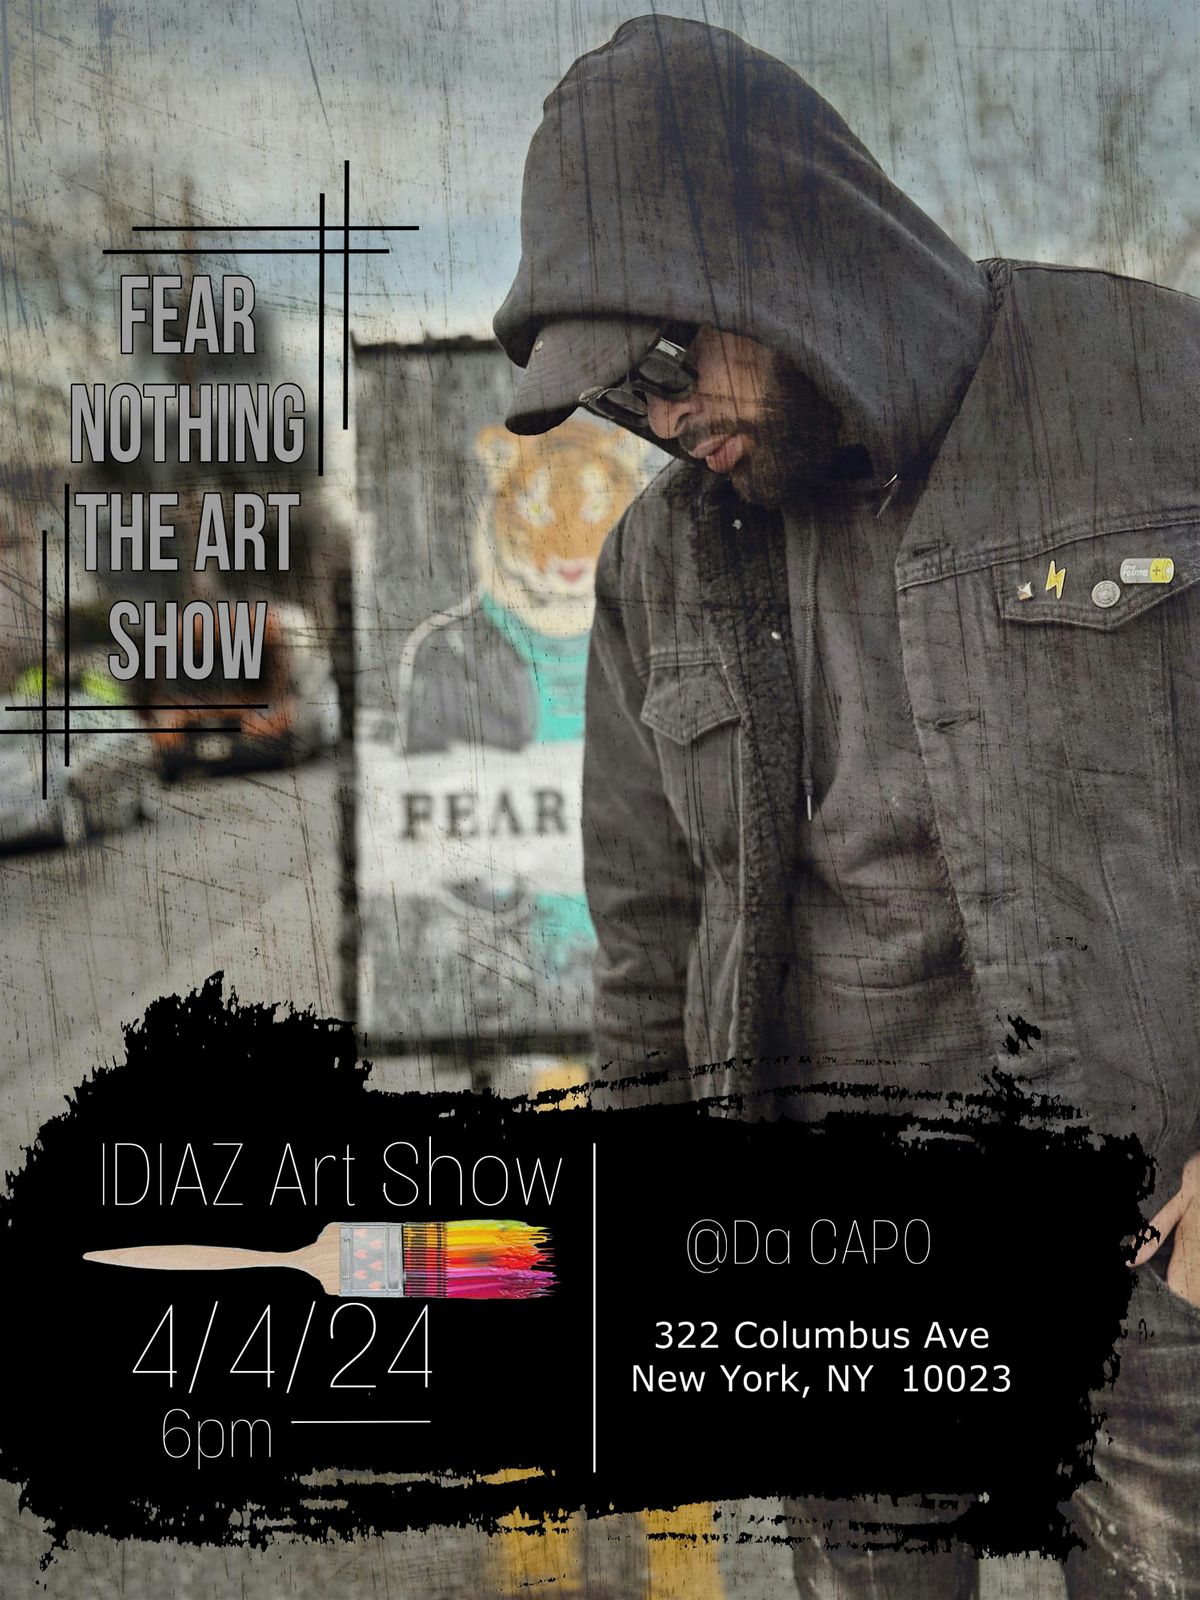 FEAR NOTHING. THE ART SHOW